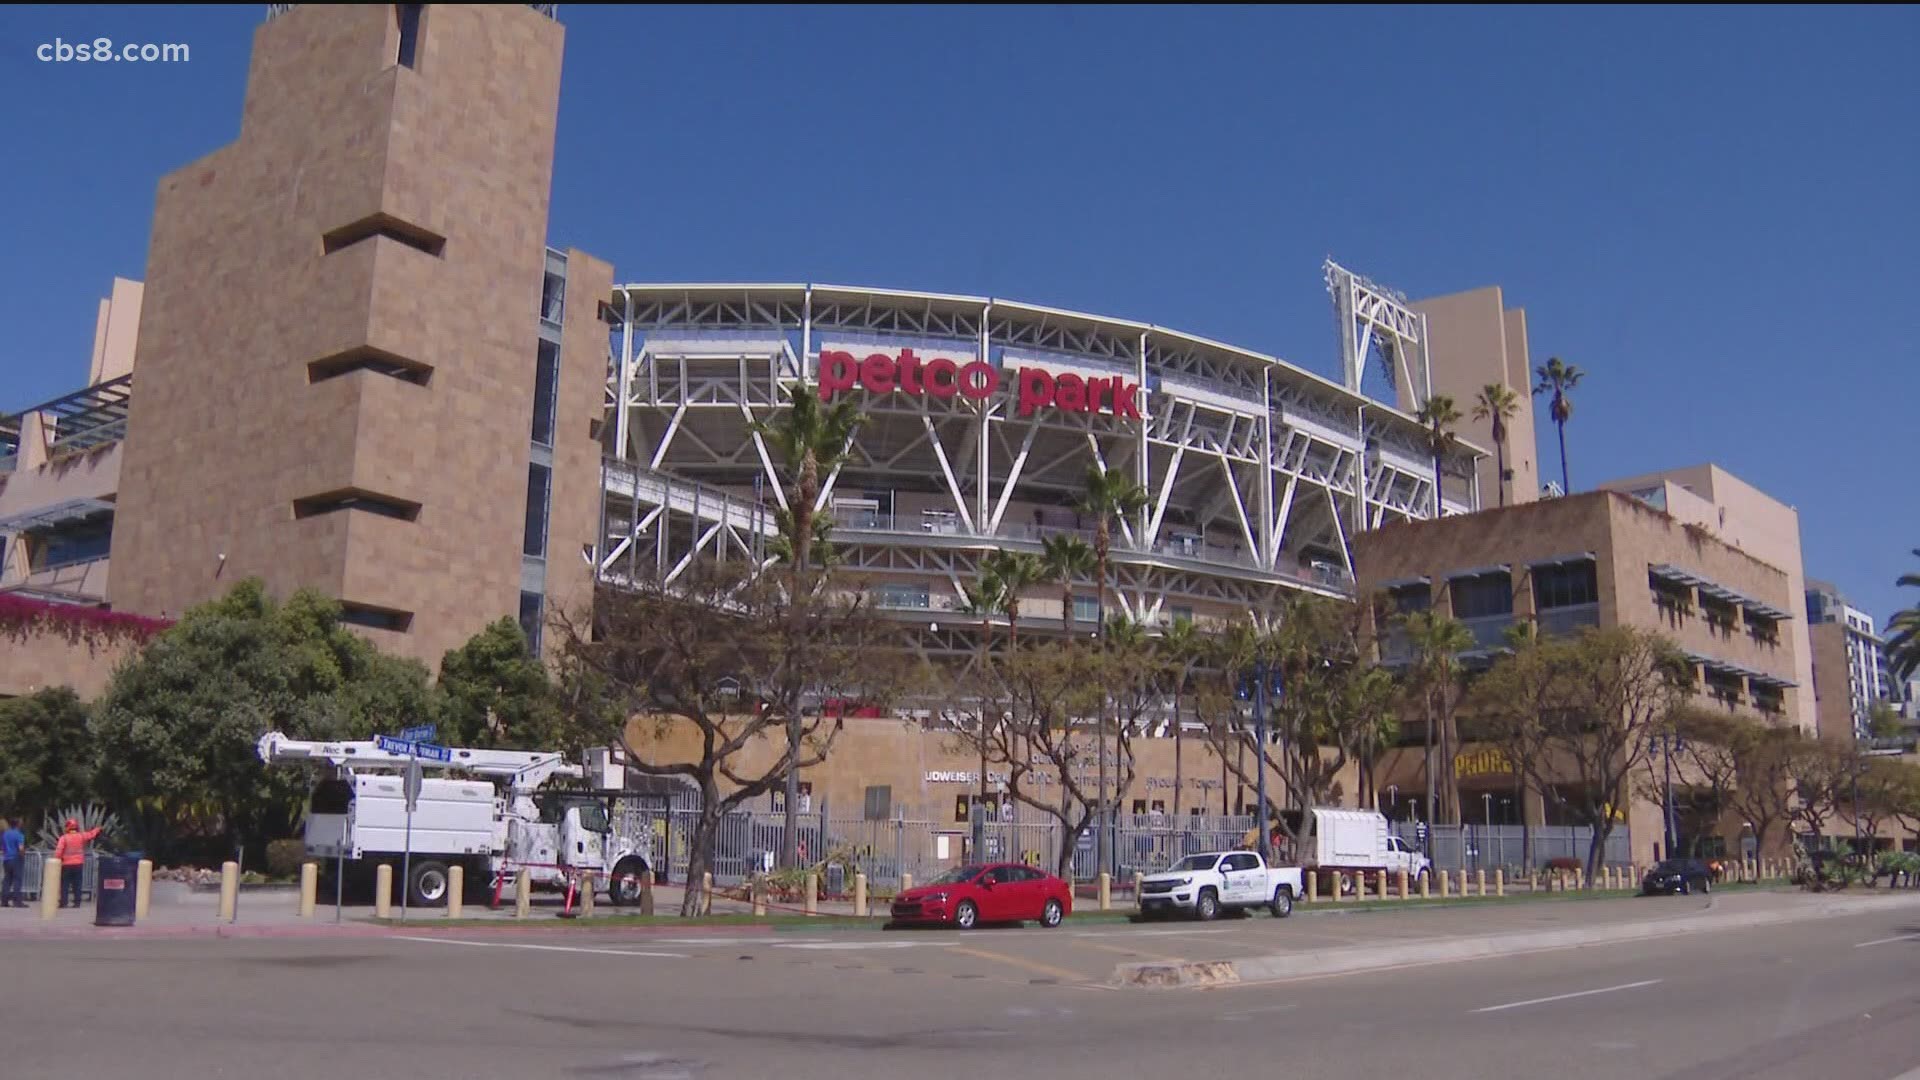 Bars, restaurants and Padre fans are on deck and ready for Opening Day on Thursday